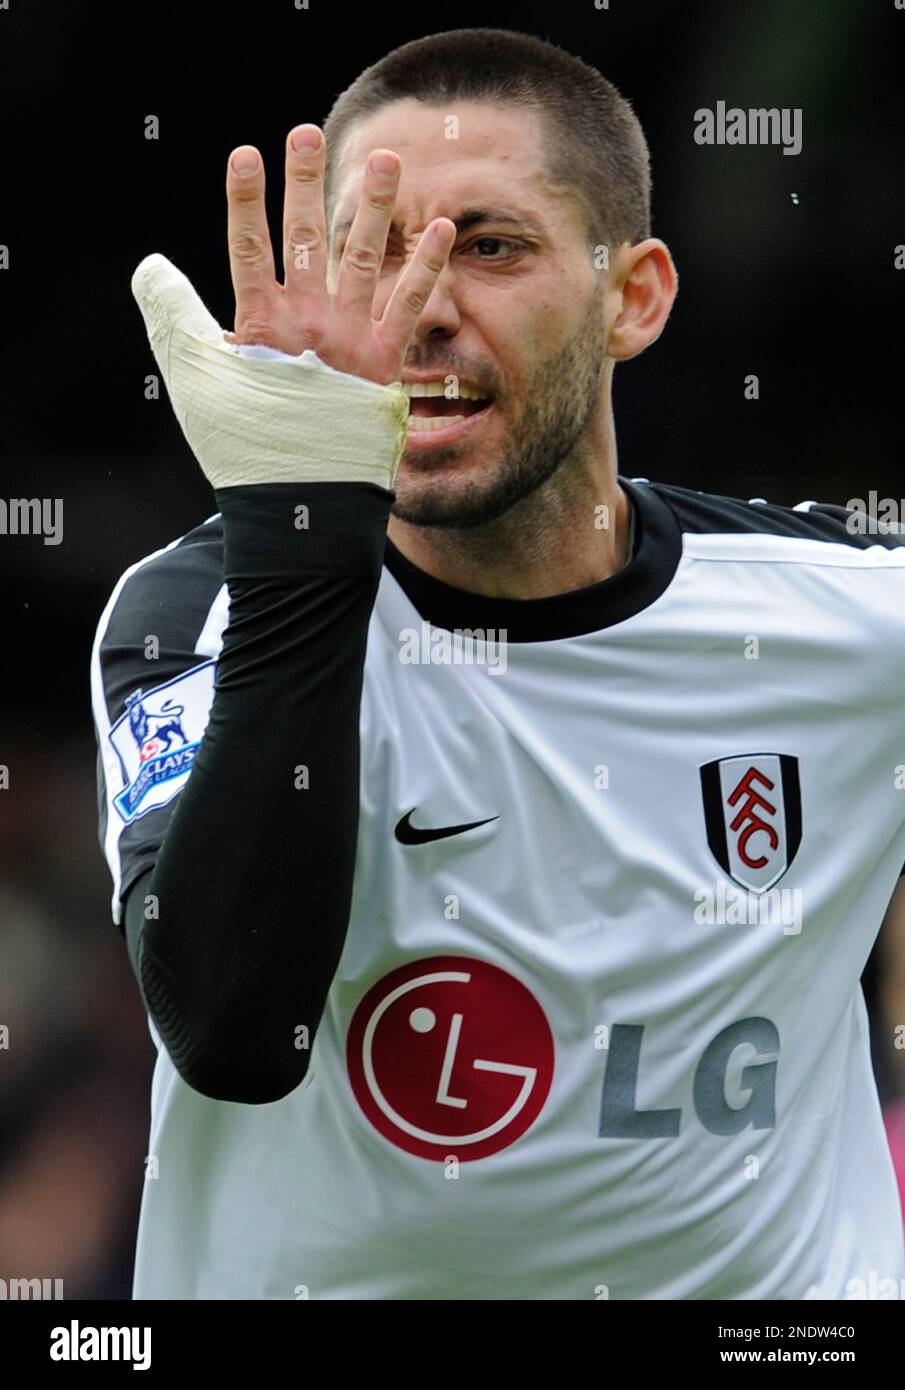 FILE - This Oct. 2, 2010, file photo shows Fulham's Clint Dempsey  celebrating his goal against West Ham United during their English Premier  League soccer match in London, England. Whether it's moving